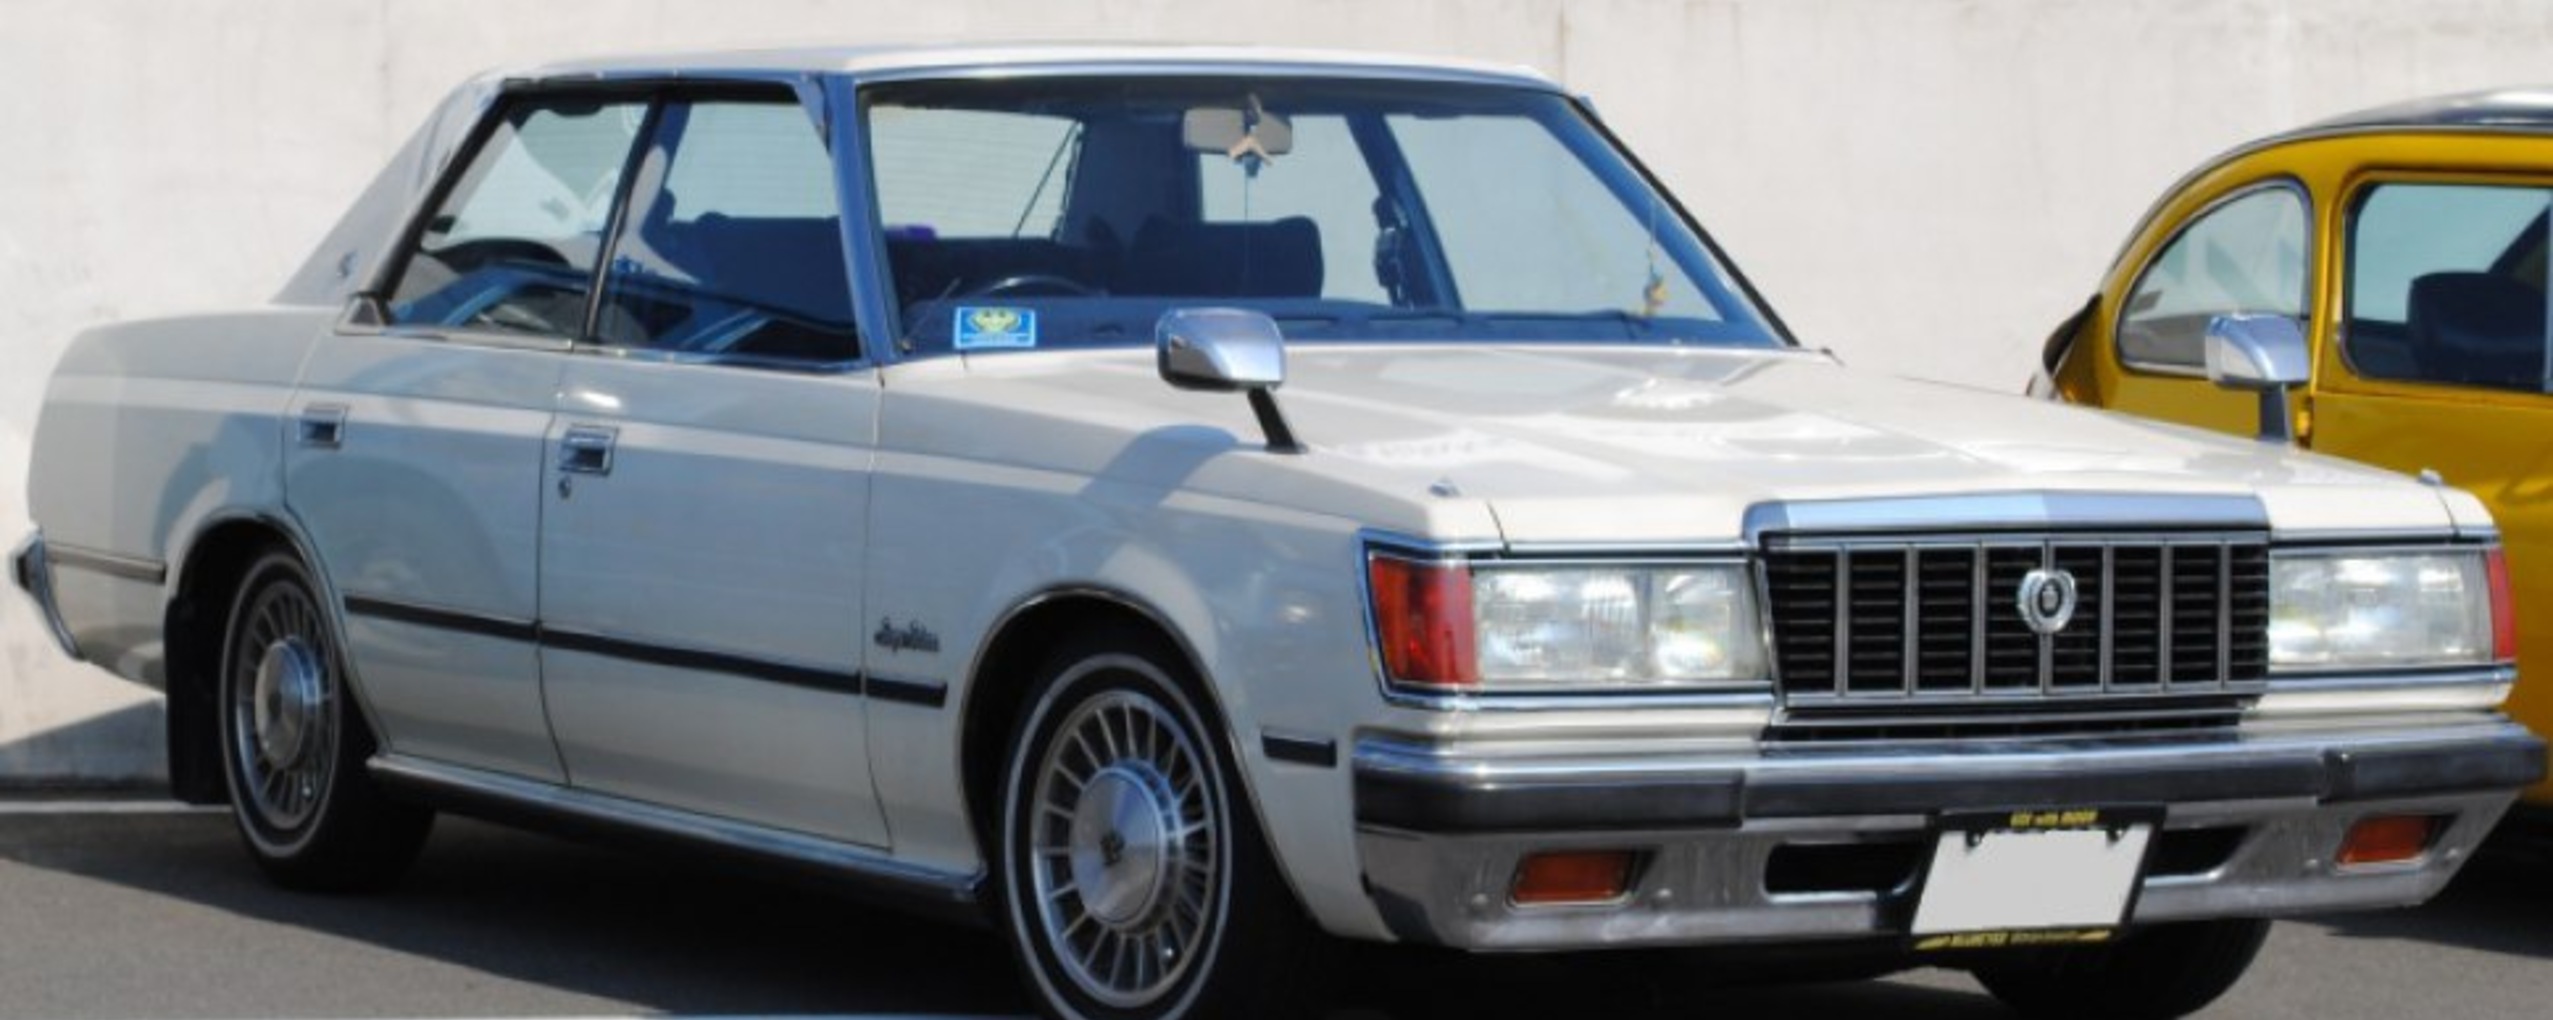 Toyota Crown (S1) 2.8 SI (MS112) (146 Hp) 1979, 1980, 1981, 1982, 1983 